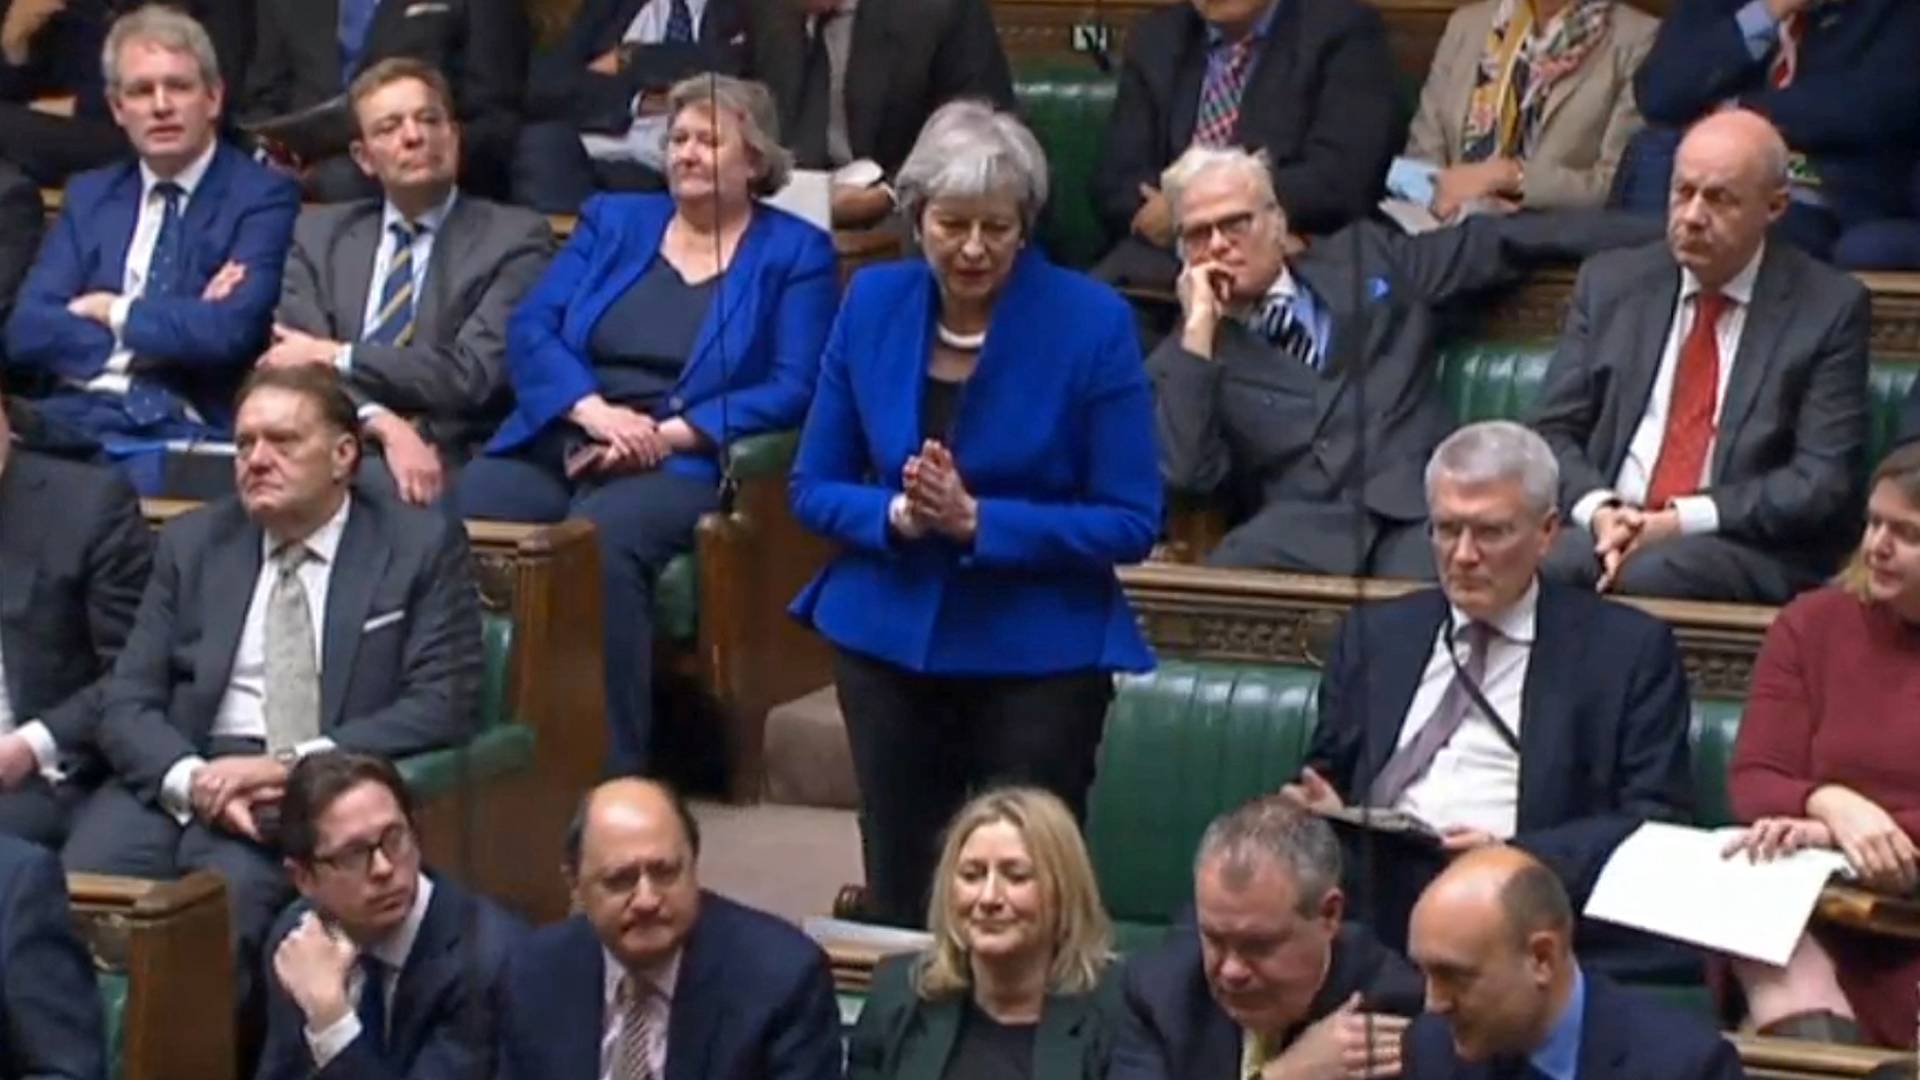  British former Prime Minister Theresa May asking a question of Boris Johnson, during his statement to MPs following the release of Sue Gray report on 31 January, 2022 (AFP)